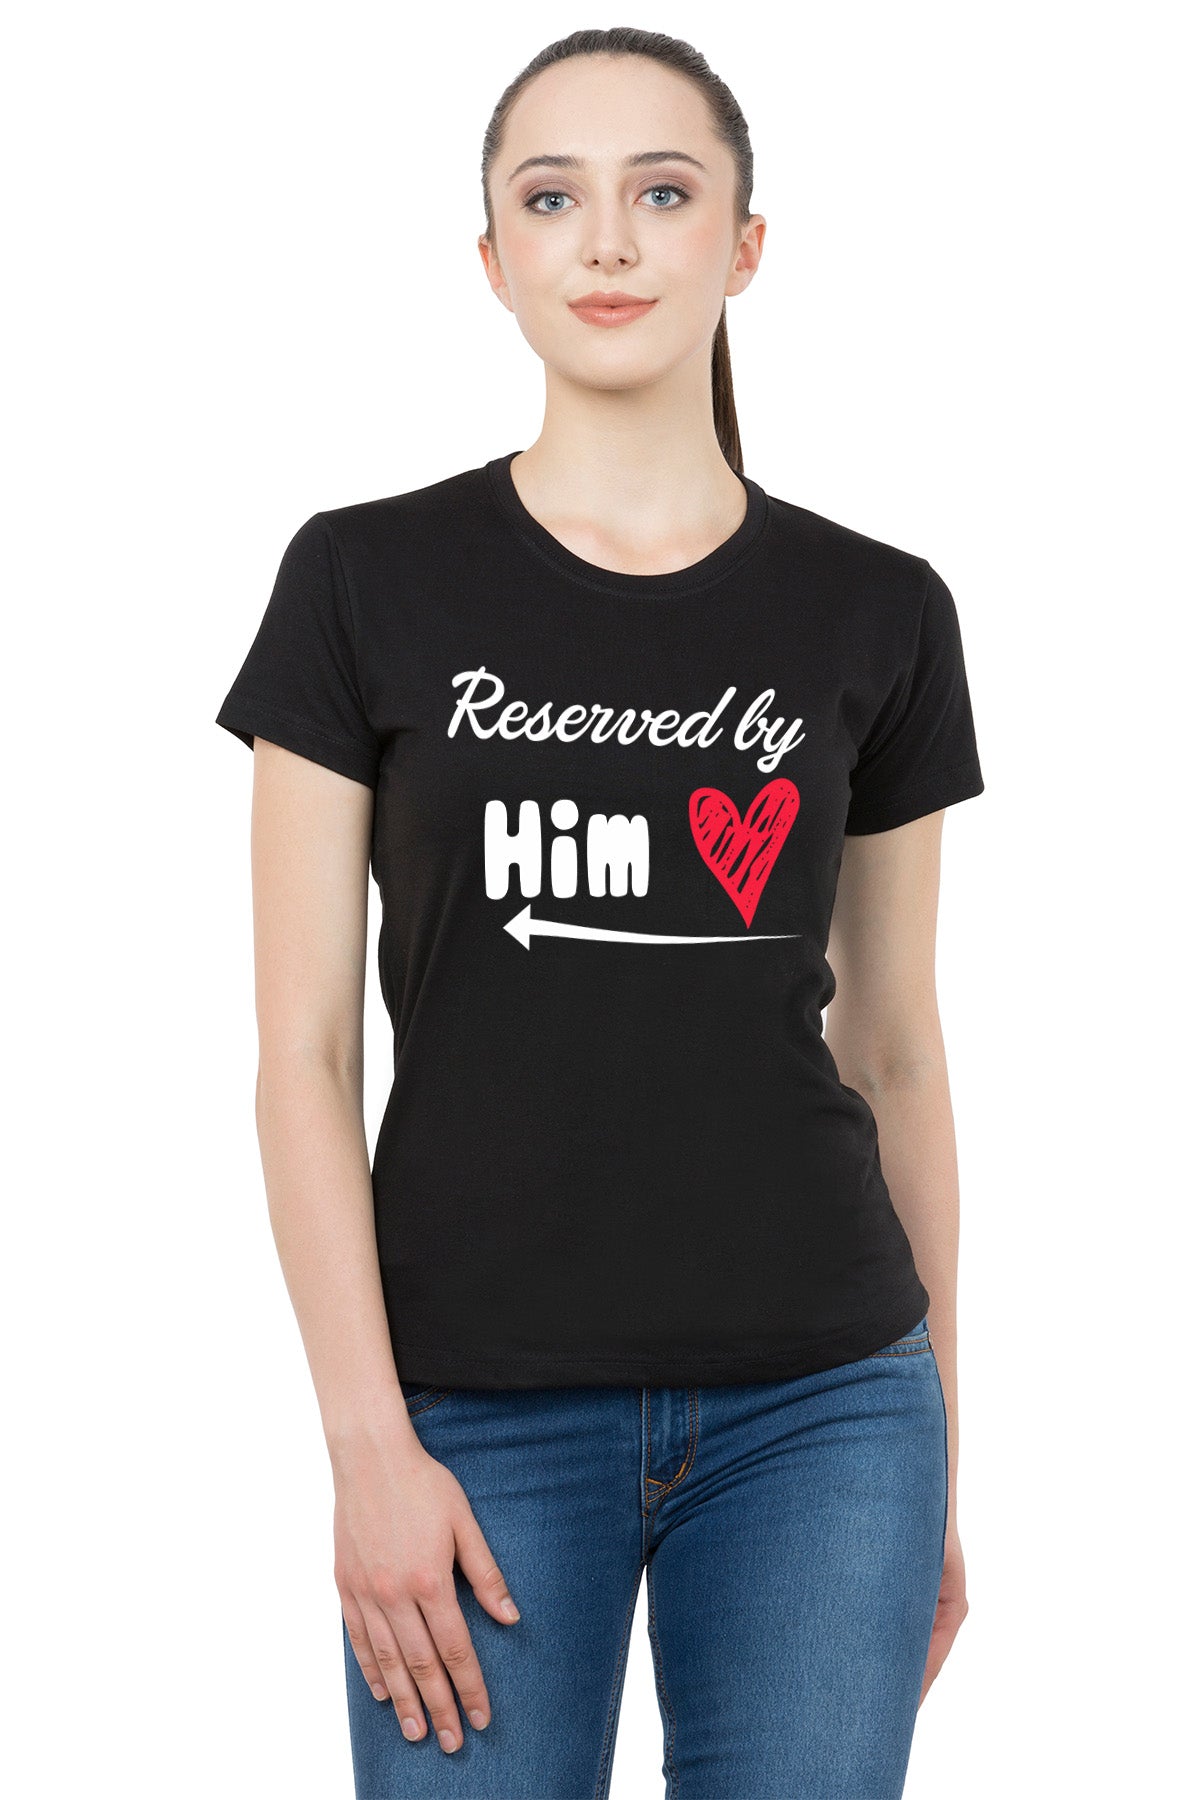 Taken by her Reserved by him matching Couple T shirts- Black